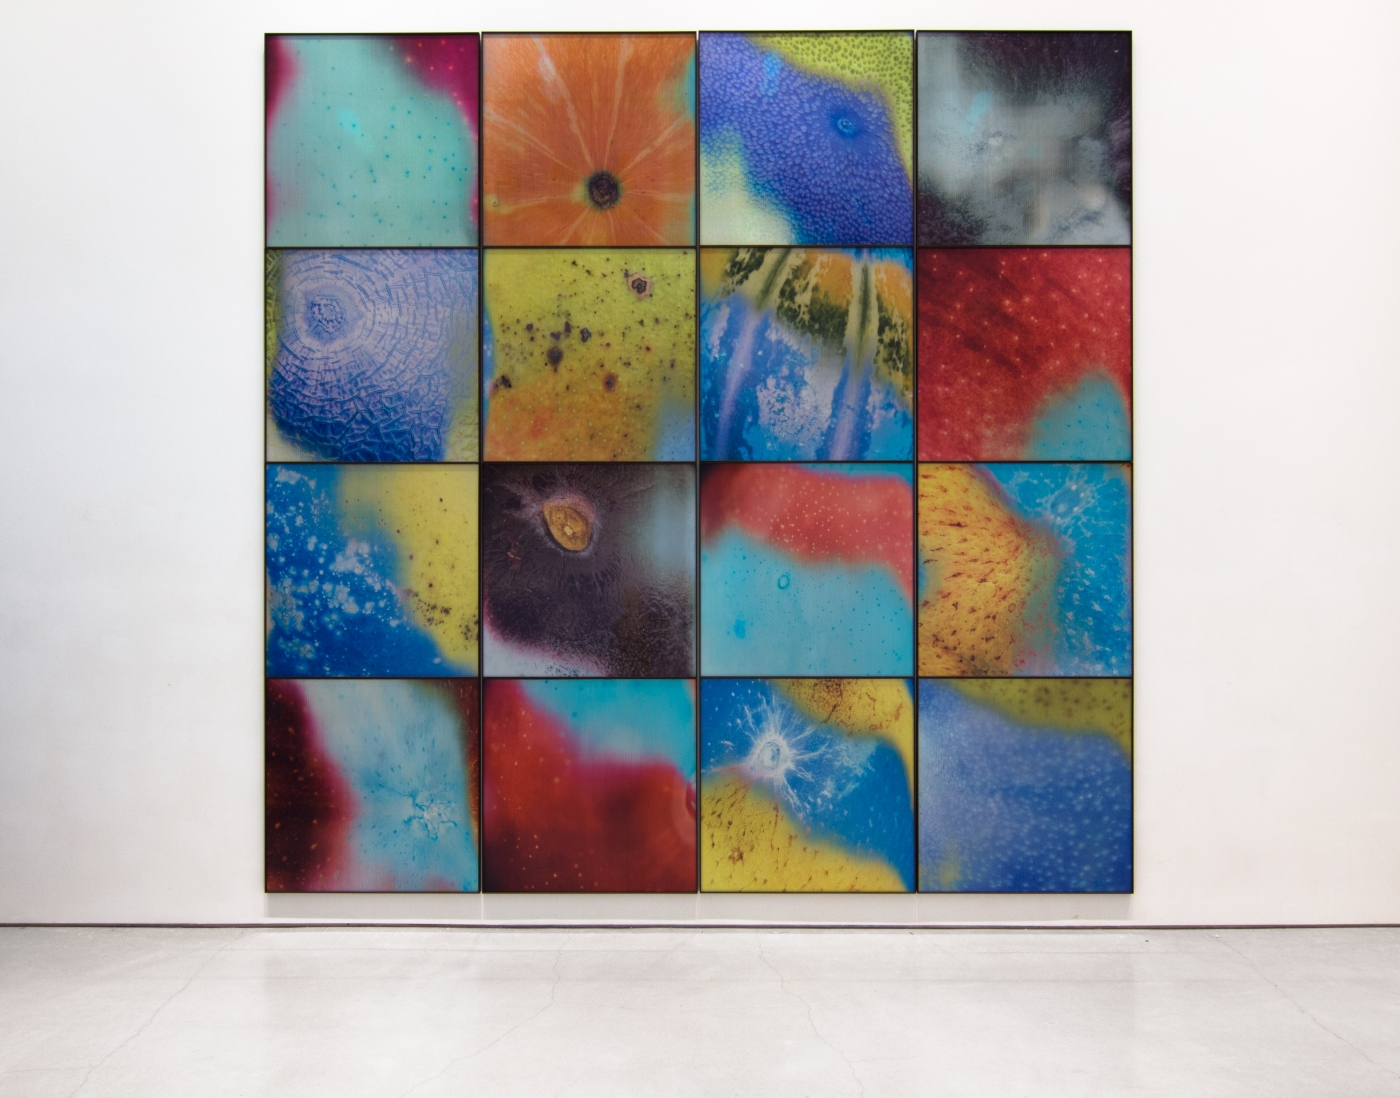 a four by four grid of colorful lenticular photographs of the skins of fruits hangs on a gallery wall